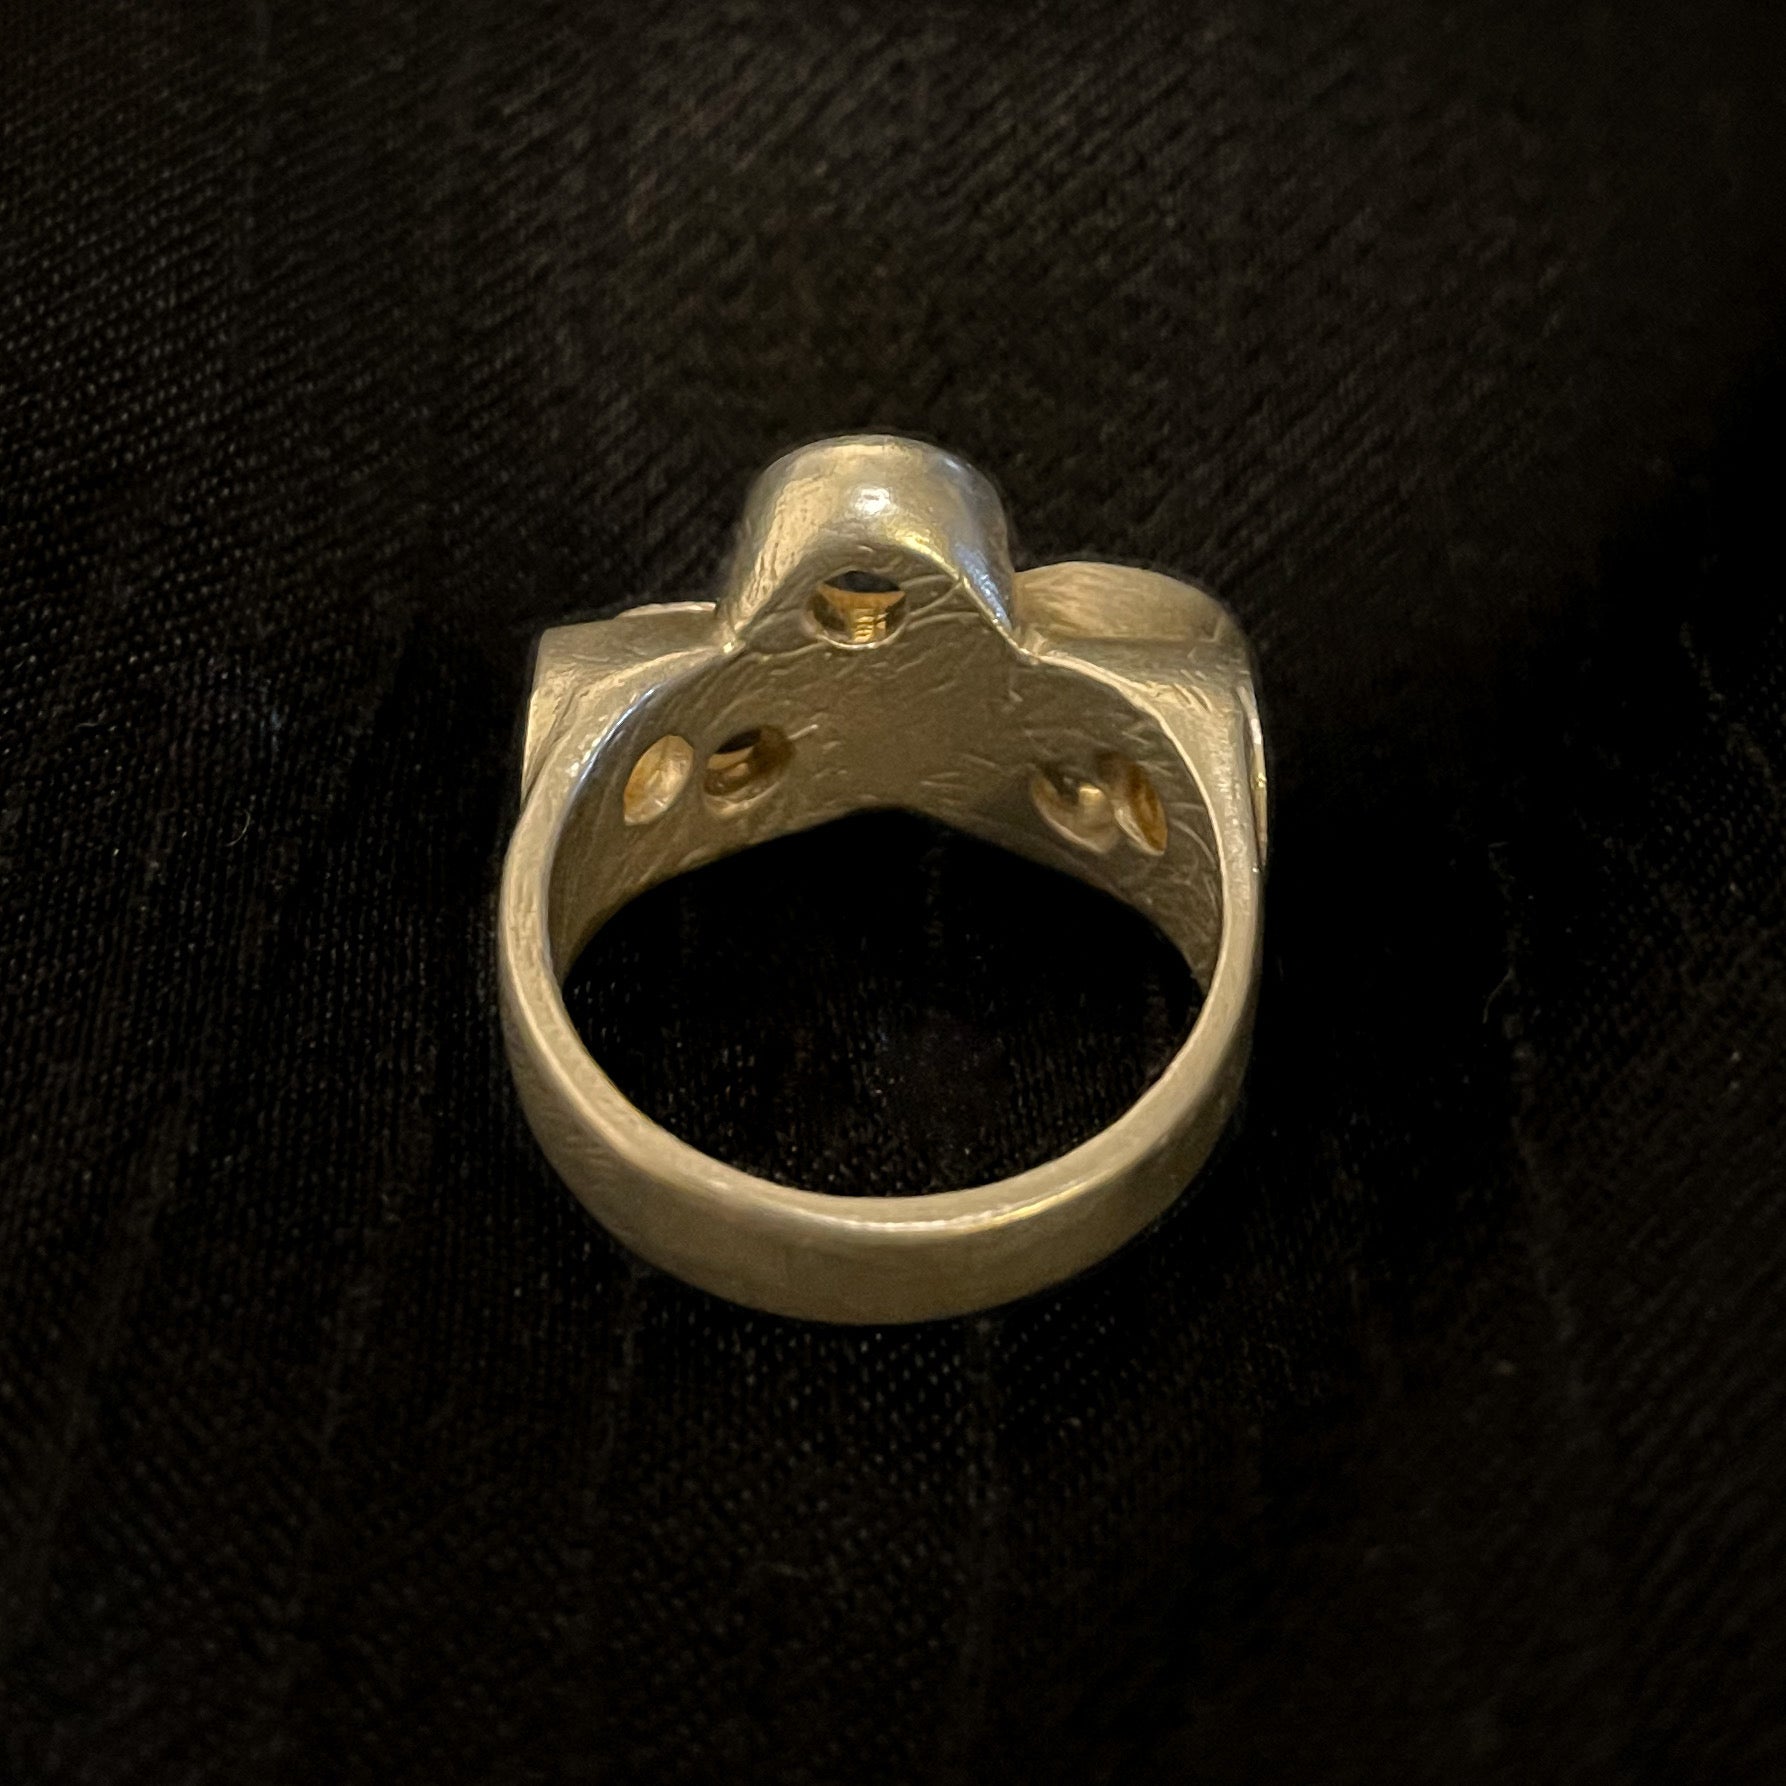 Gold and Silver Ring